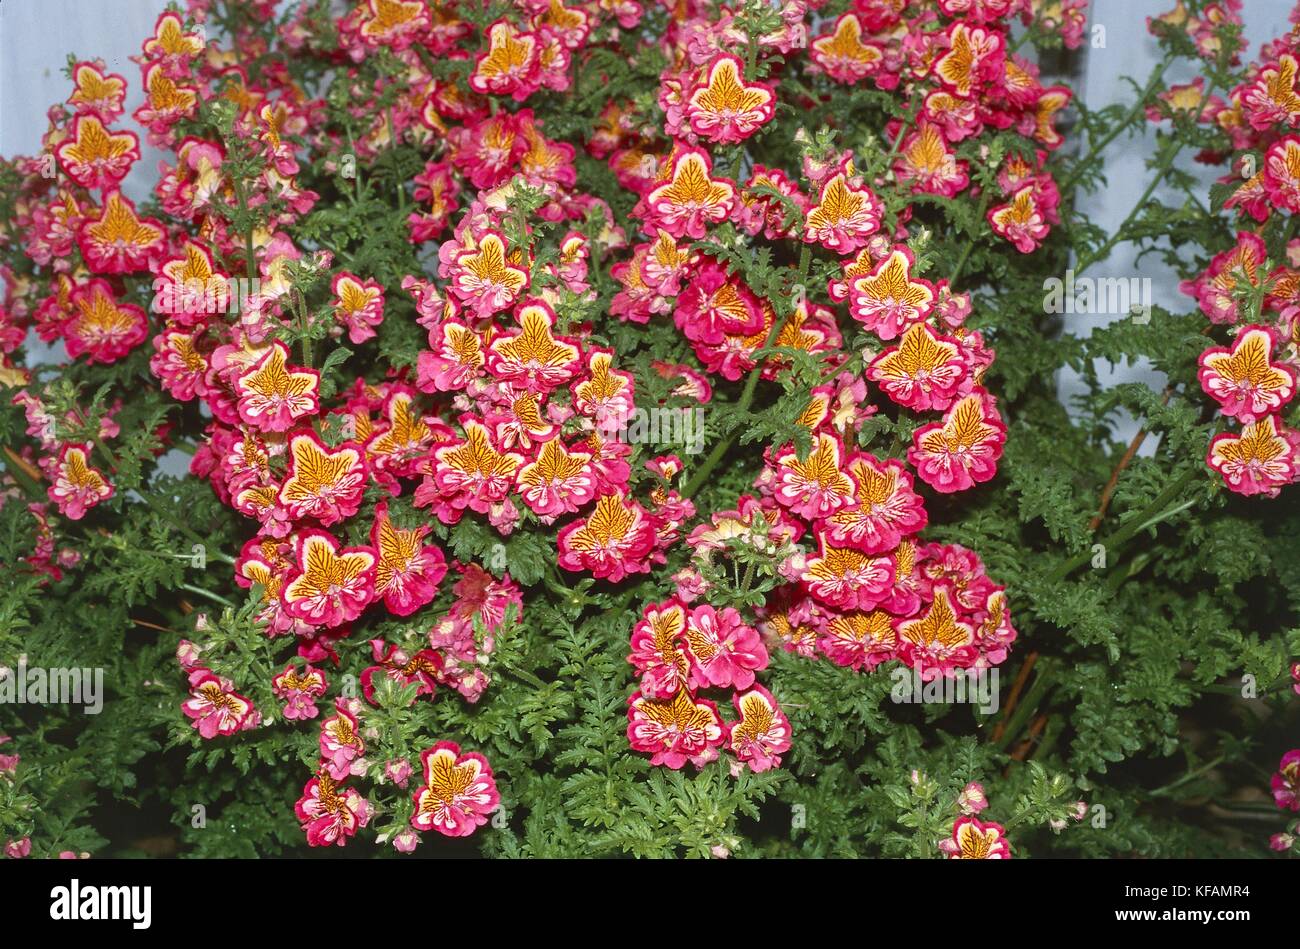 Botanique, scrophulariacee schizanthus, 'carnaval'. Banque D'Images